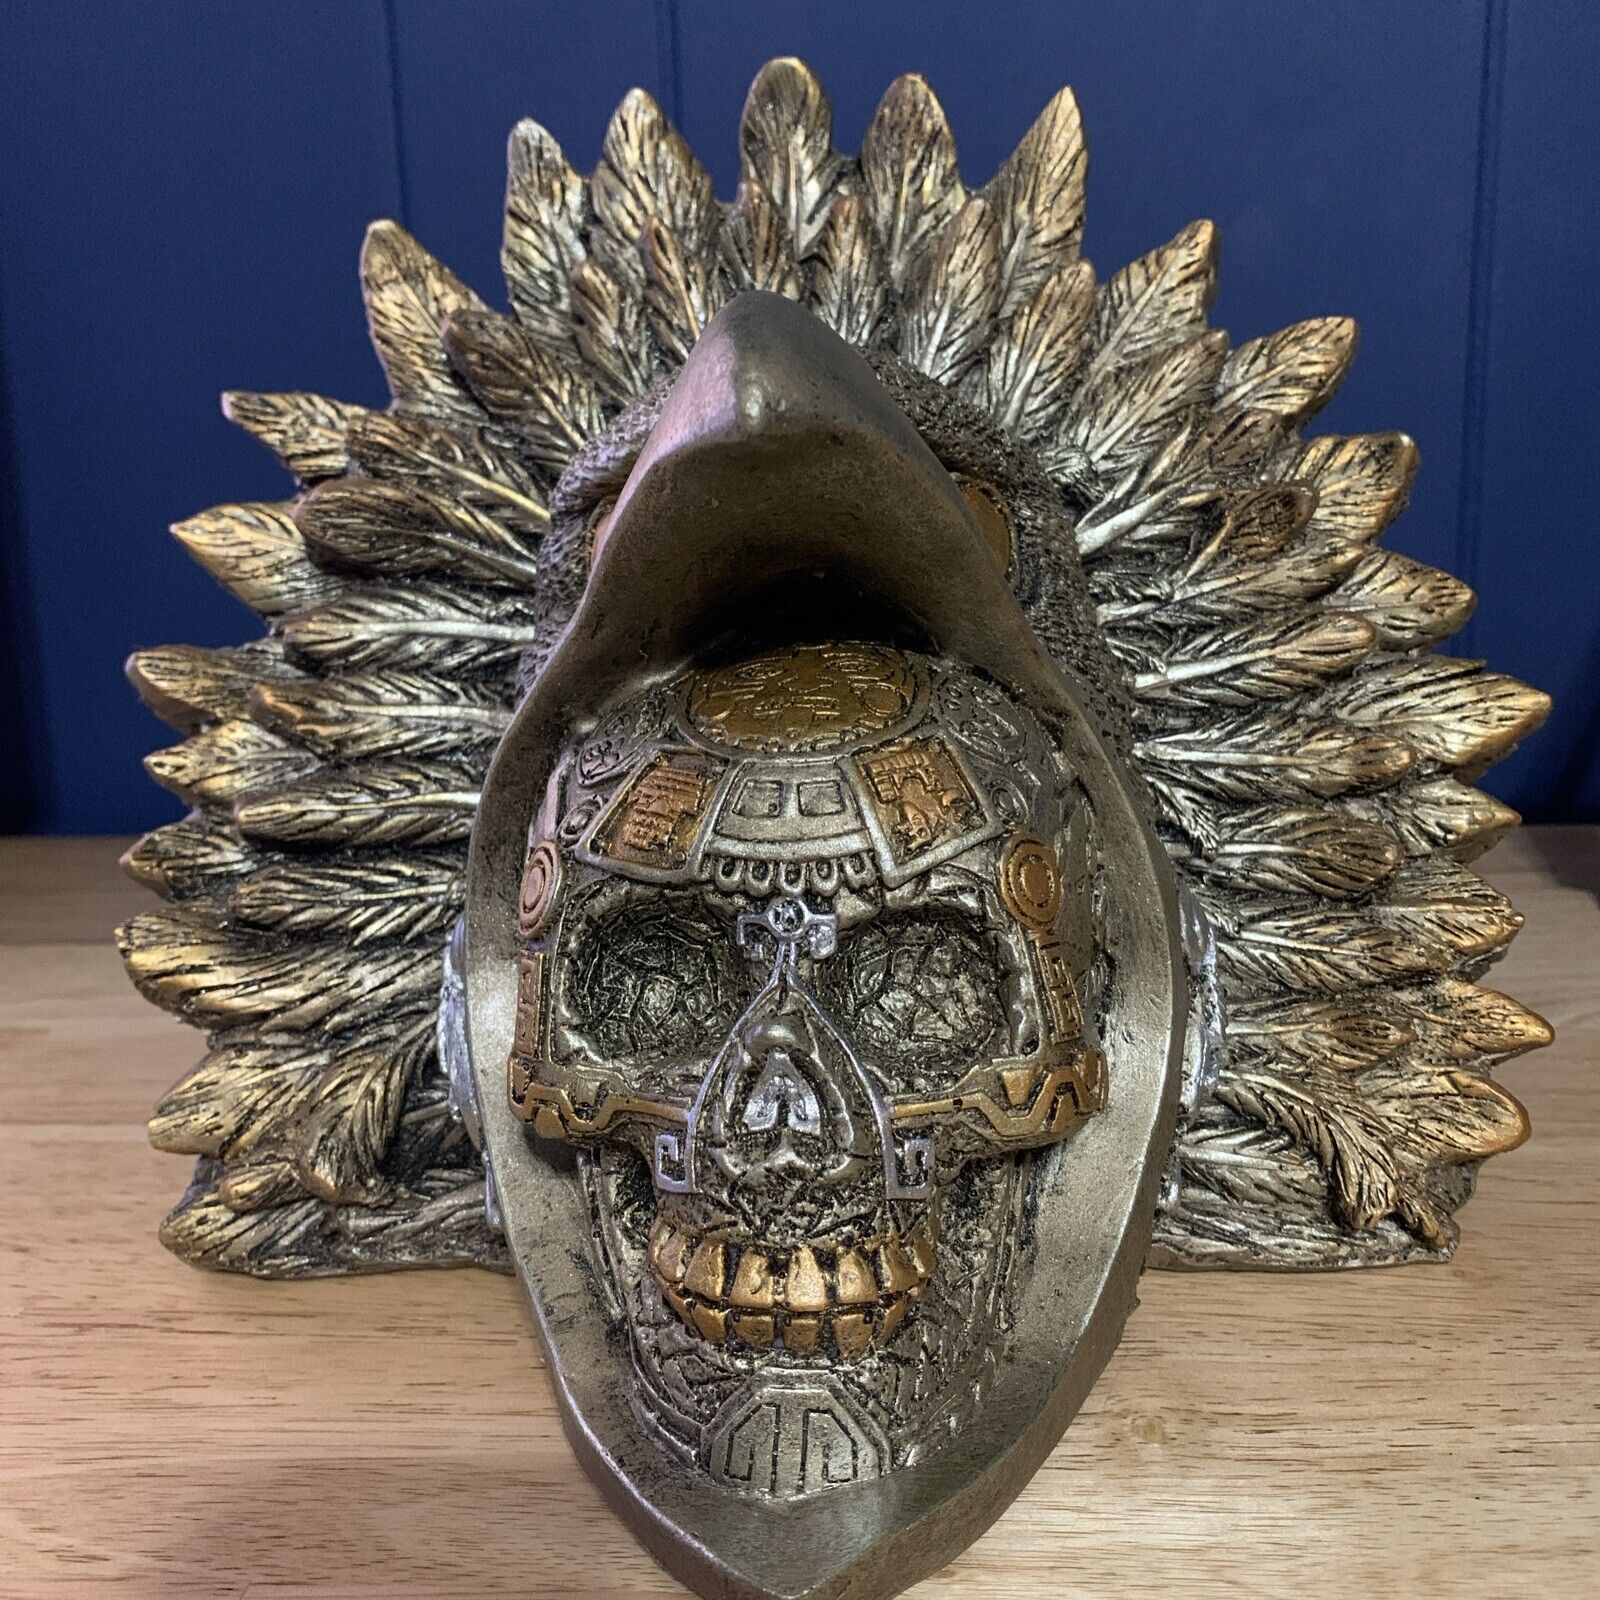 Authentic Mexican Eagle Warrior Aztec Mayan Calendar Mask Skull Head Day of Dead